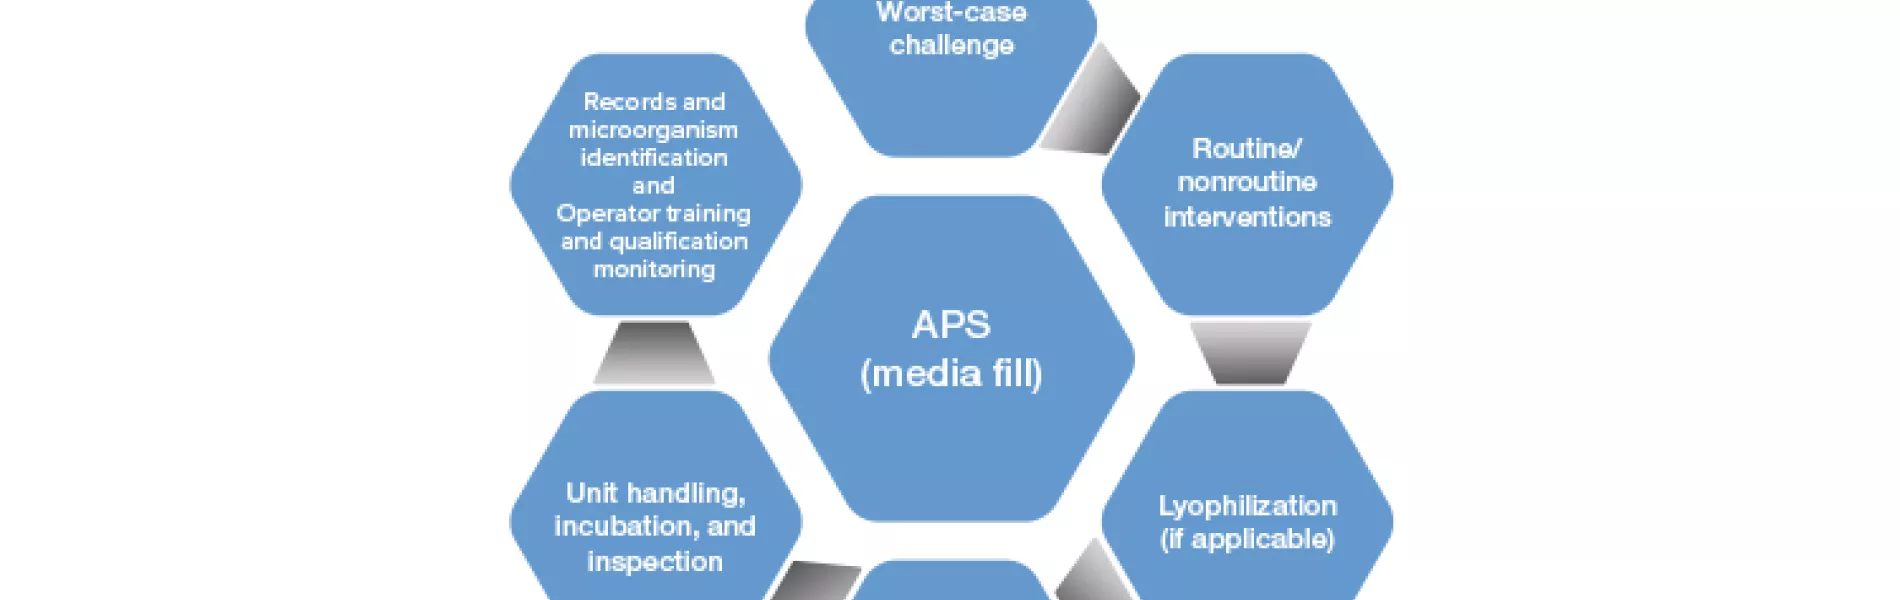 Figure 1: Points to consider when designing the media fill study.